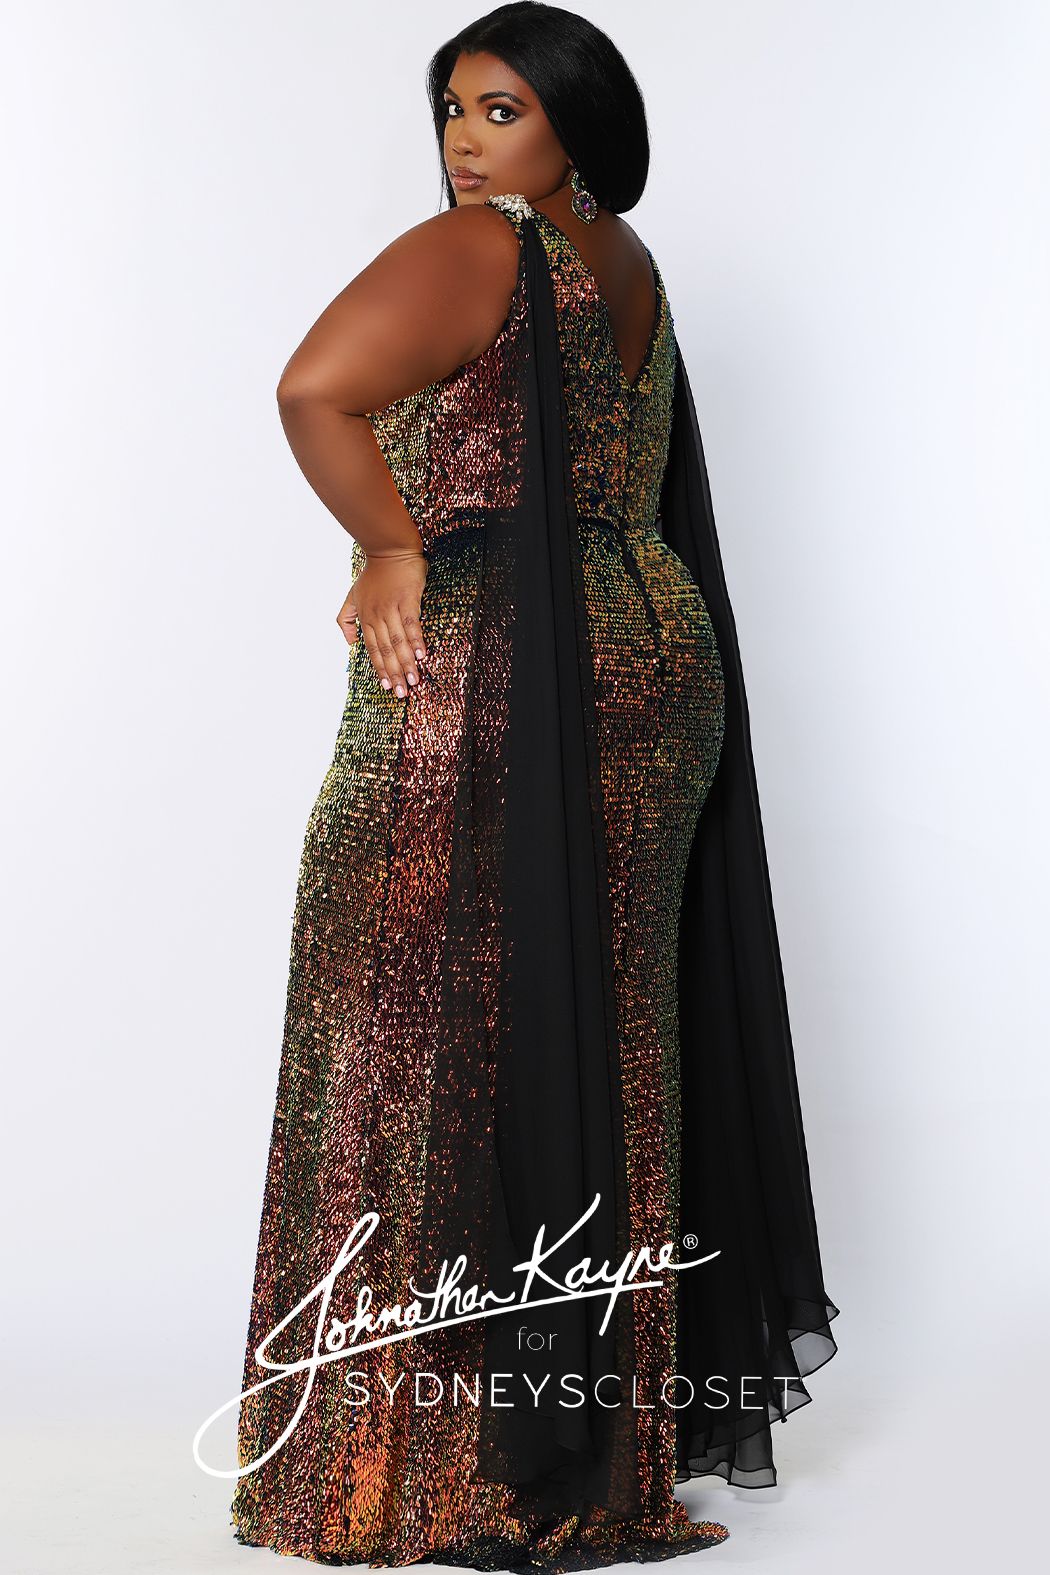 Johnathan Kayne for Sydney's Closet JK 2109 Aurora fitted plus sized sequin mermaid prom dress with shoulder capes.  The flowy scarves on this pageant gown are detachable.  This long evening gown has a plunging v neckline with a mesh panel.   JK2109